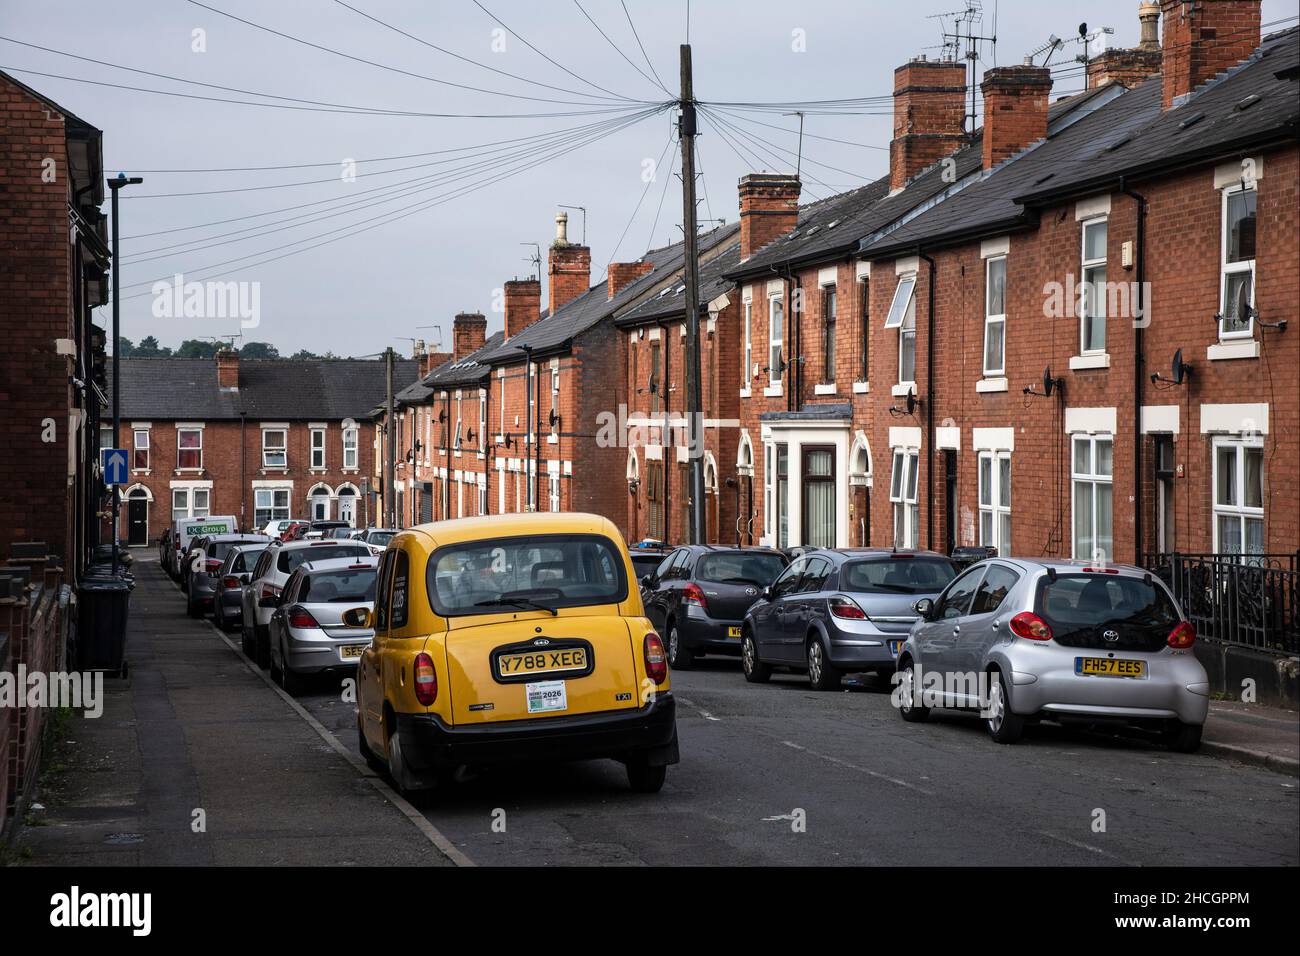 A terraced street in the inner city area of Rose Hill, Derby, England Stock Photo